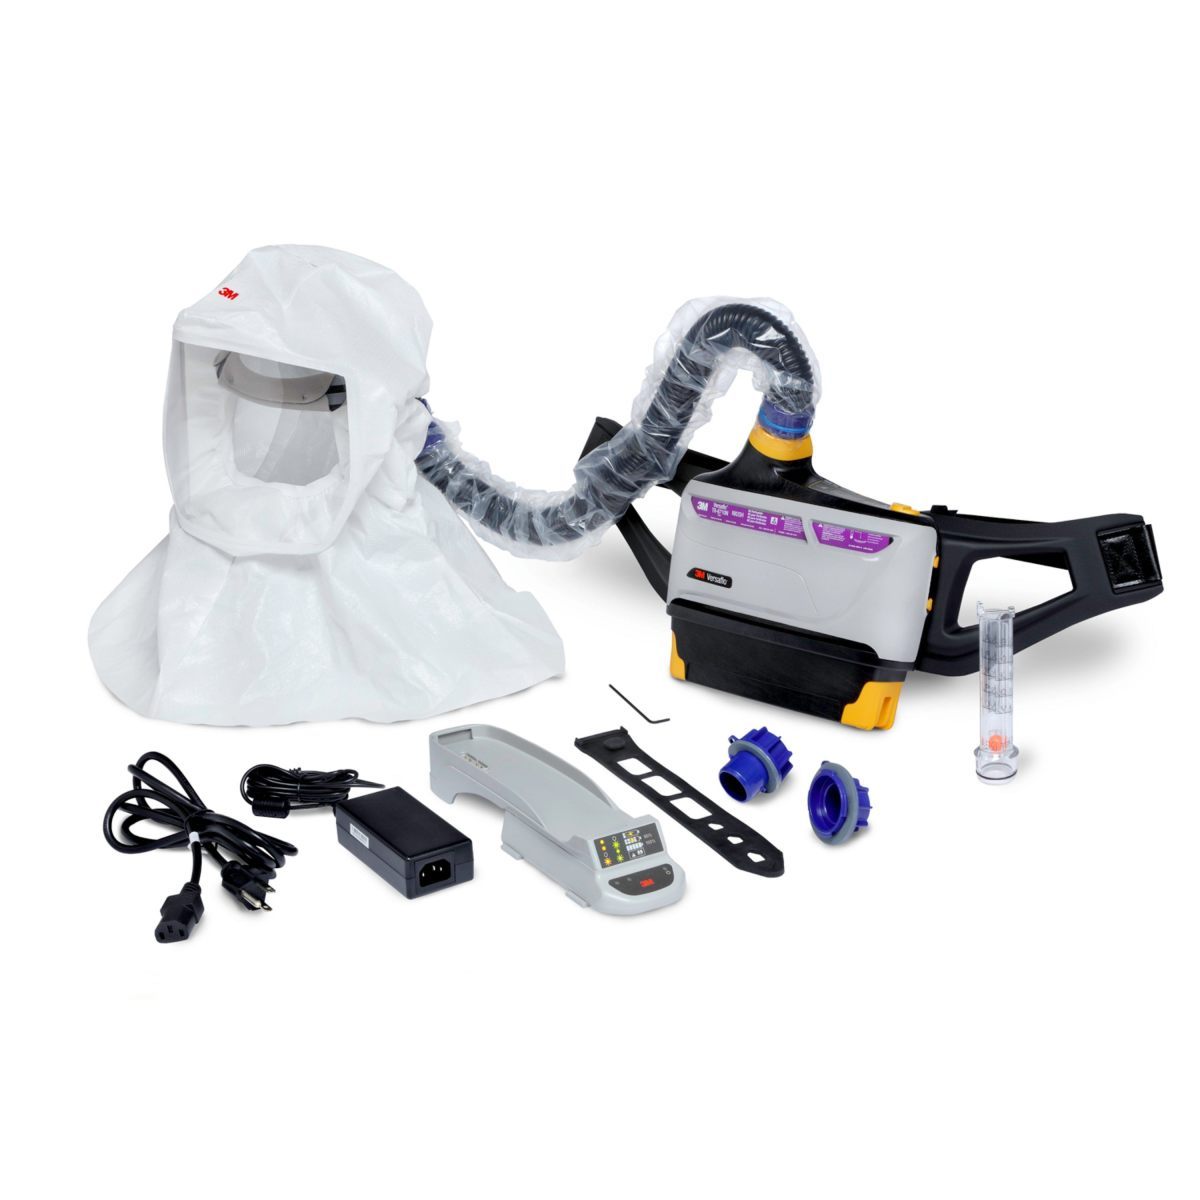 3M™ Versaflo™ TR-800-ECK Intrinsically Safe Powered Air Purifying Respirator Kit (Availability restrictions apply.)